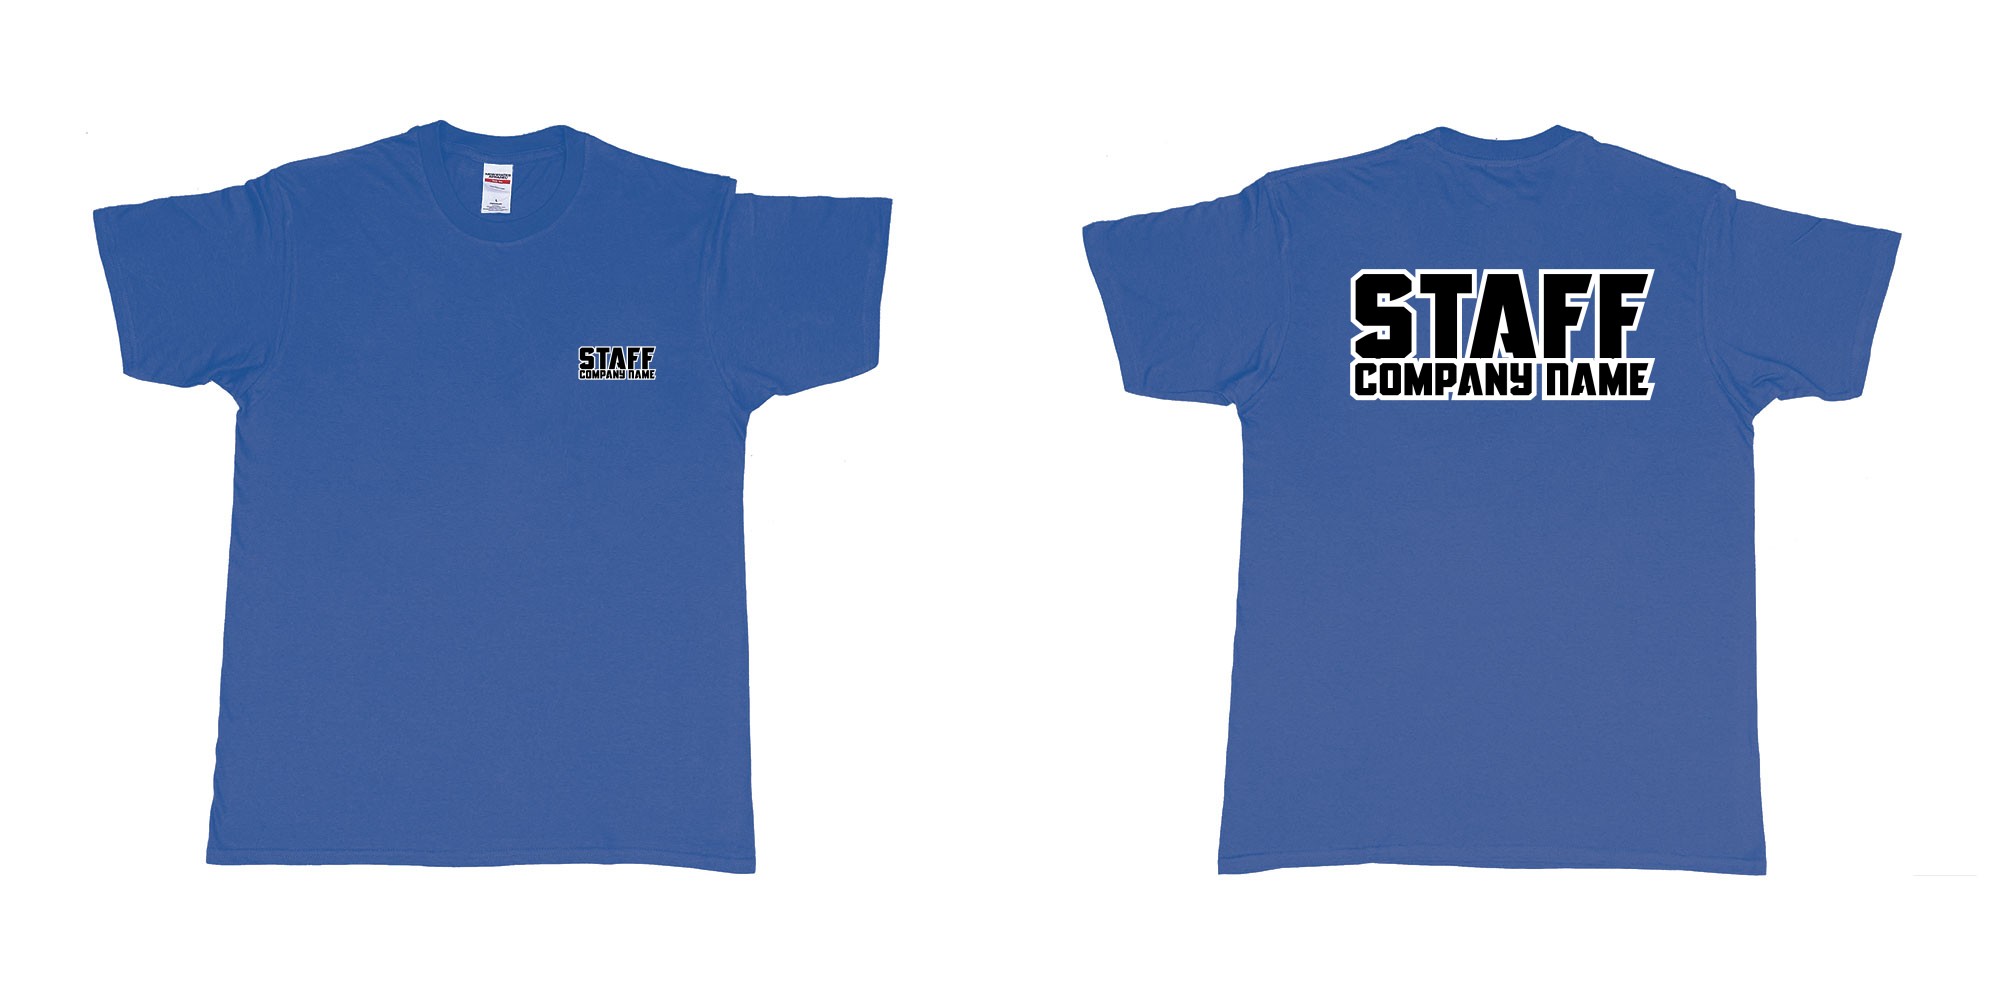 Custom tshirt design staff tshirt own company name in fabric color royal-blue choice your own text made in Bali by The Pirate Way